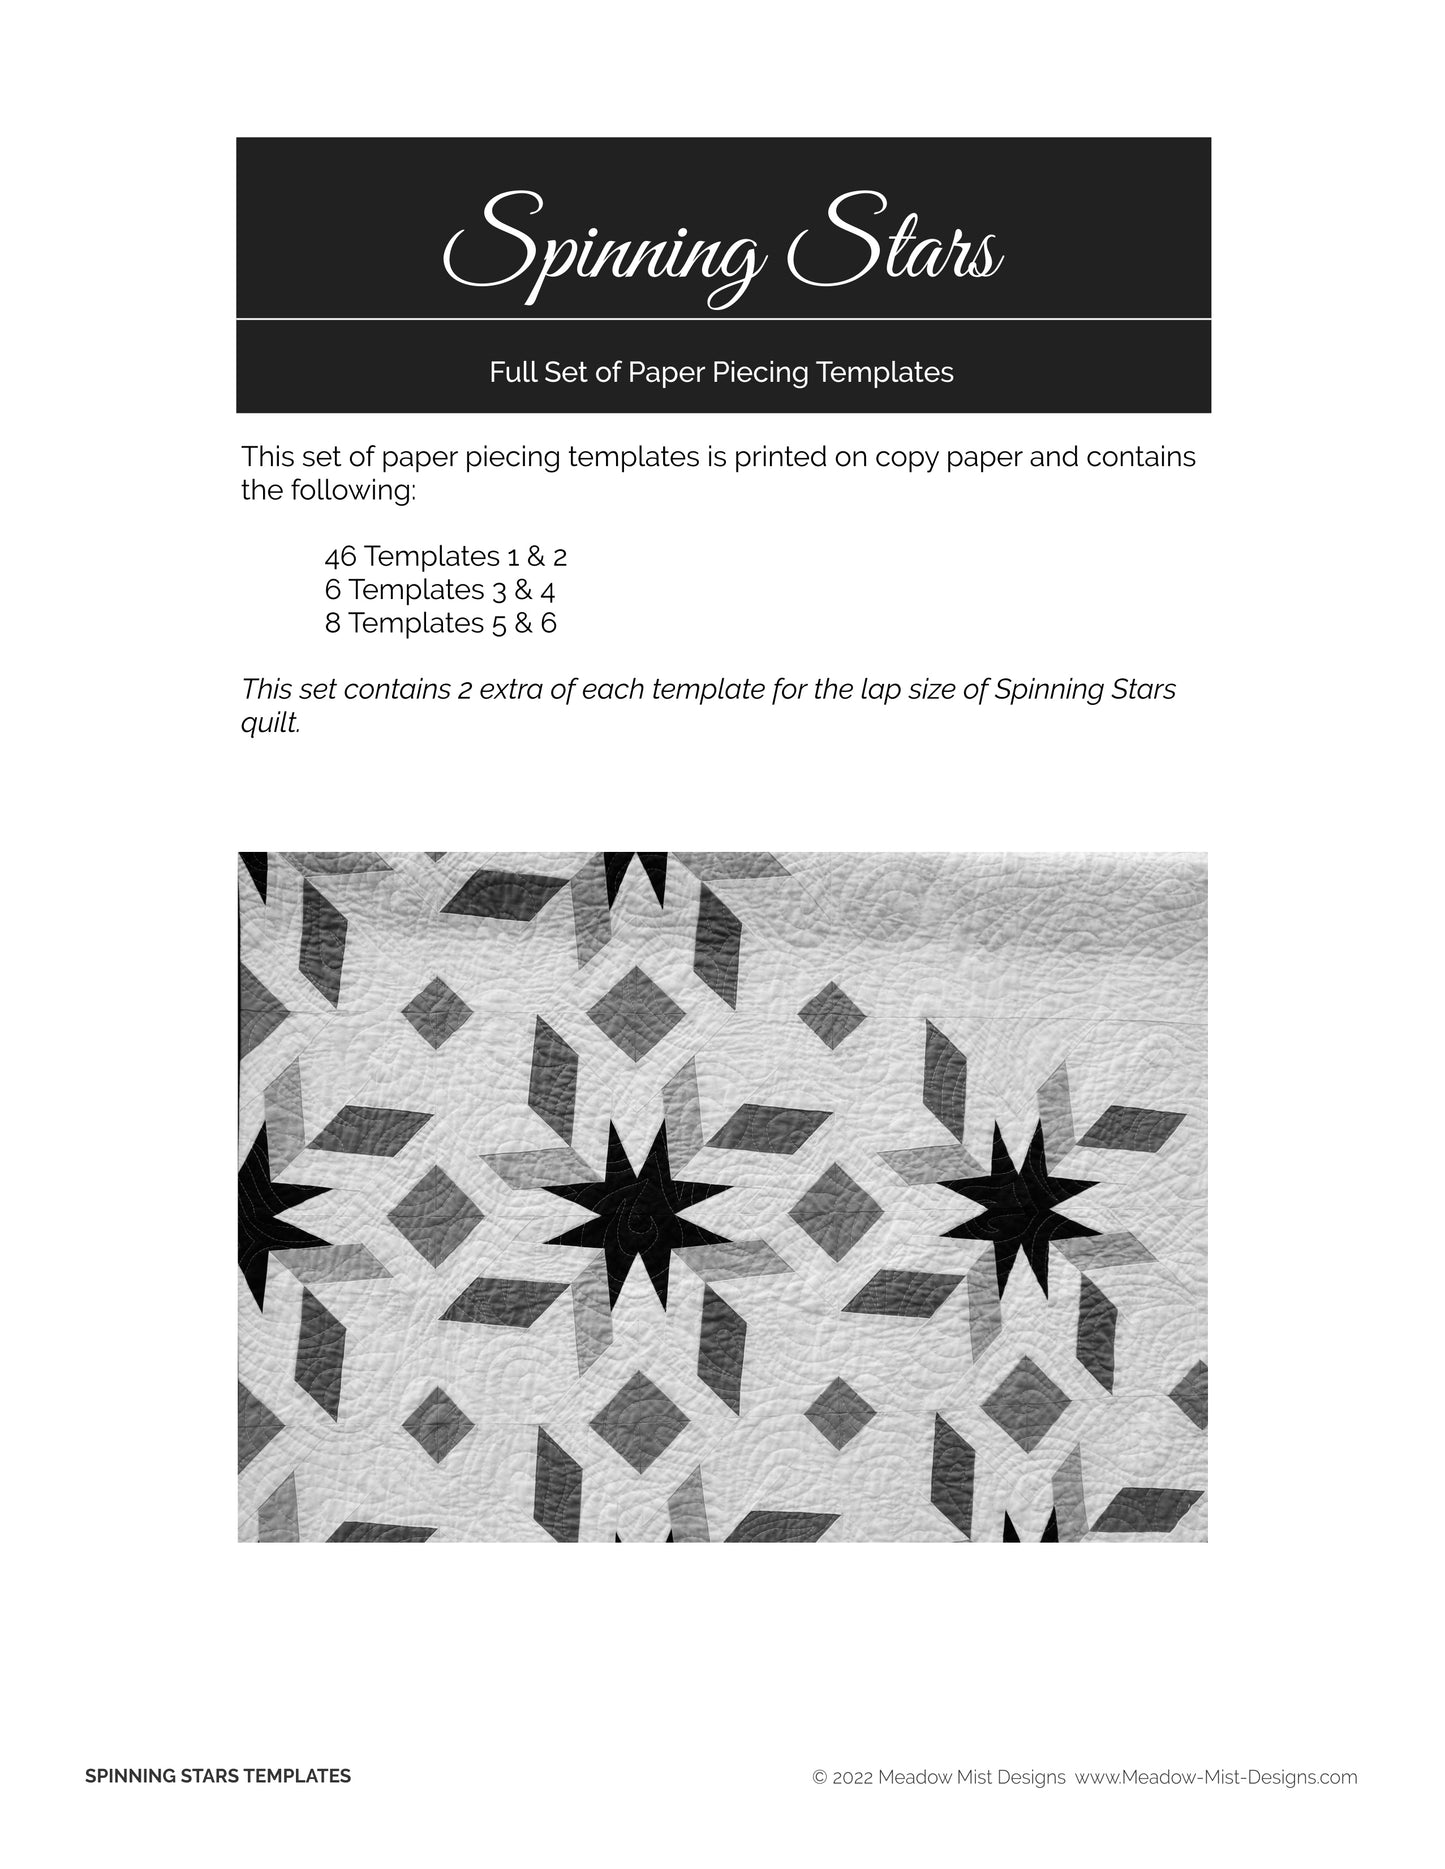 Spinning Stars - Printed Templates